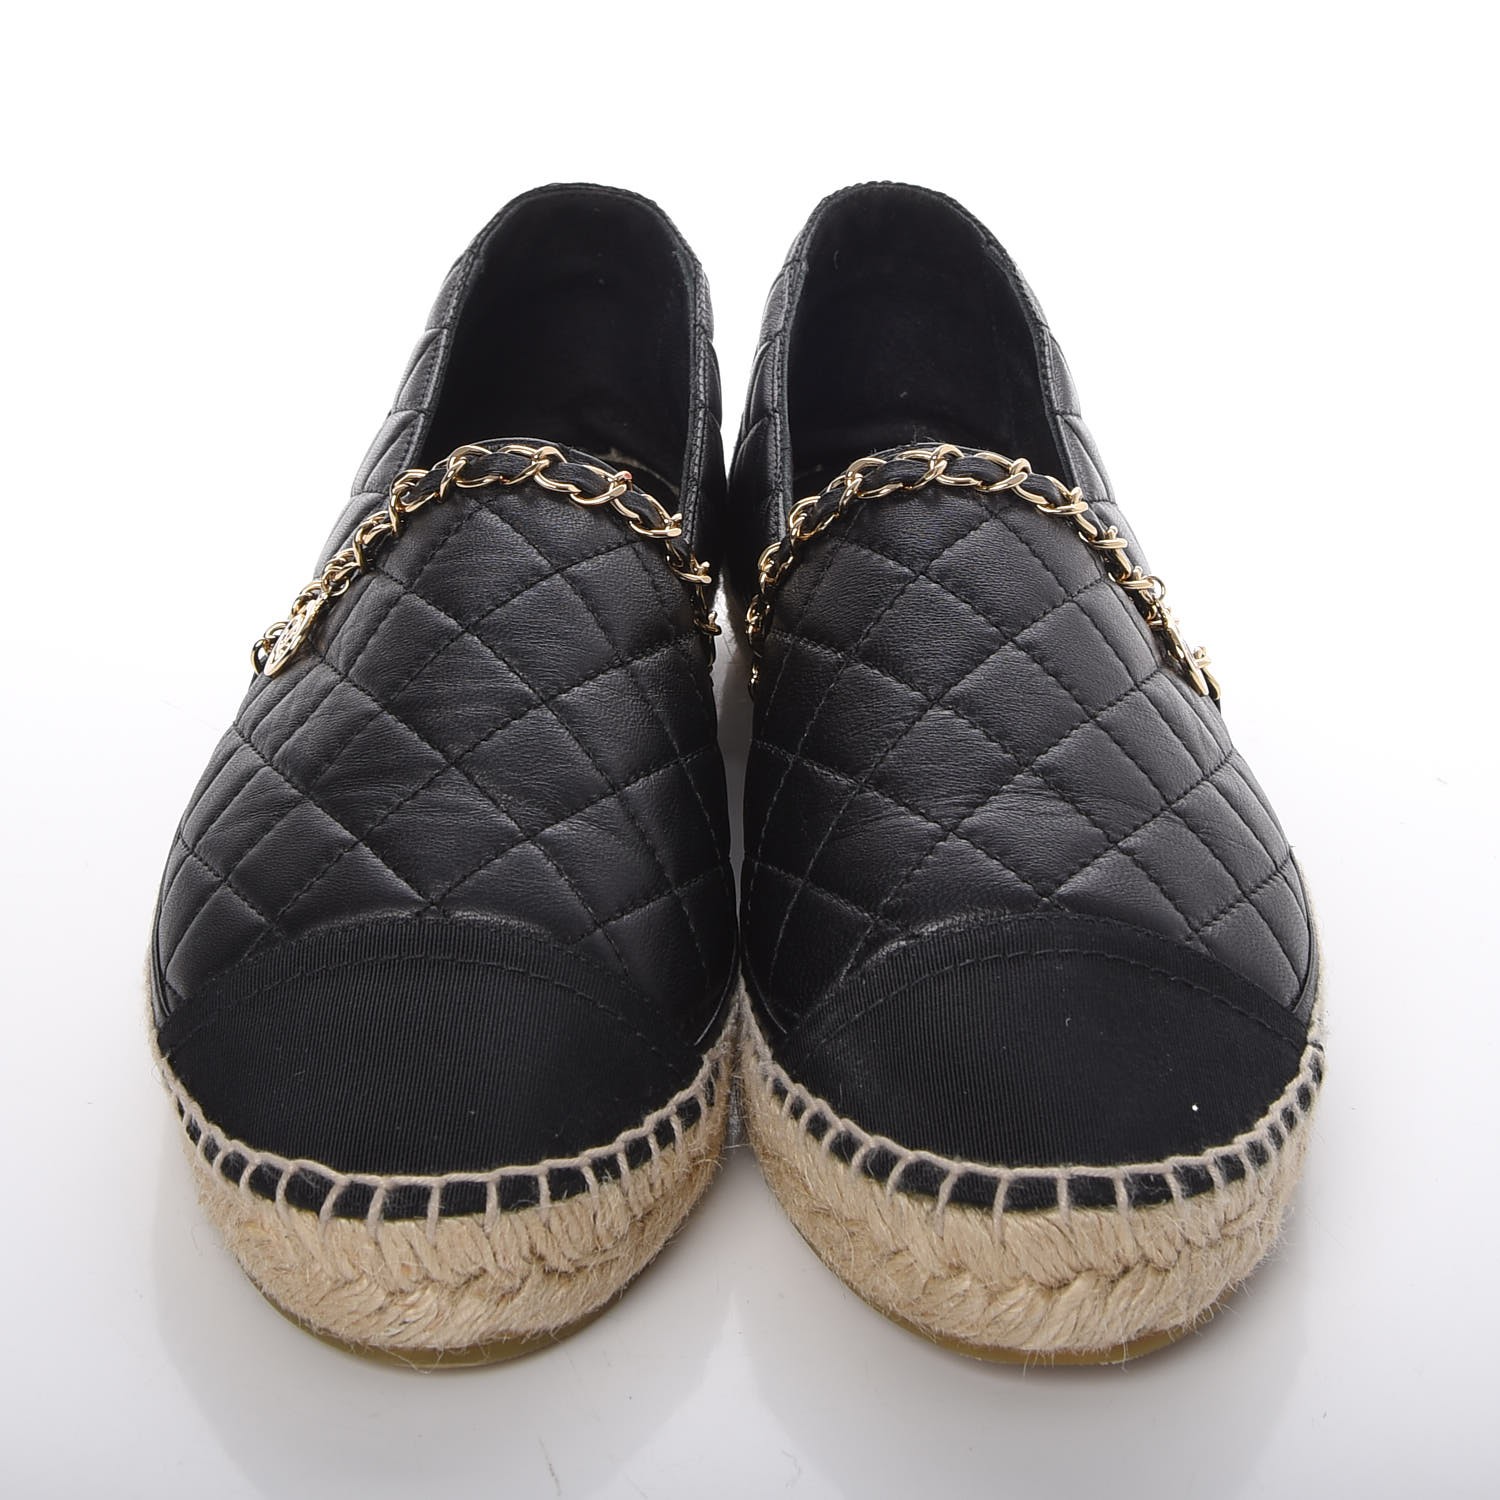 CHANEL Lambskin Quilted CC Chain Espadrilles 41 Black 274952